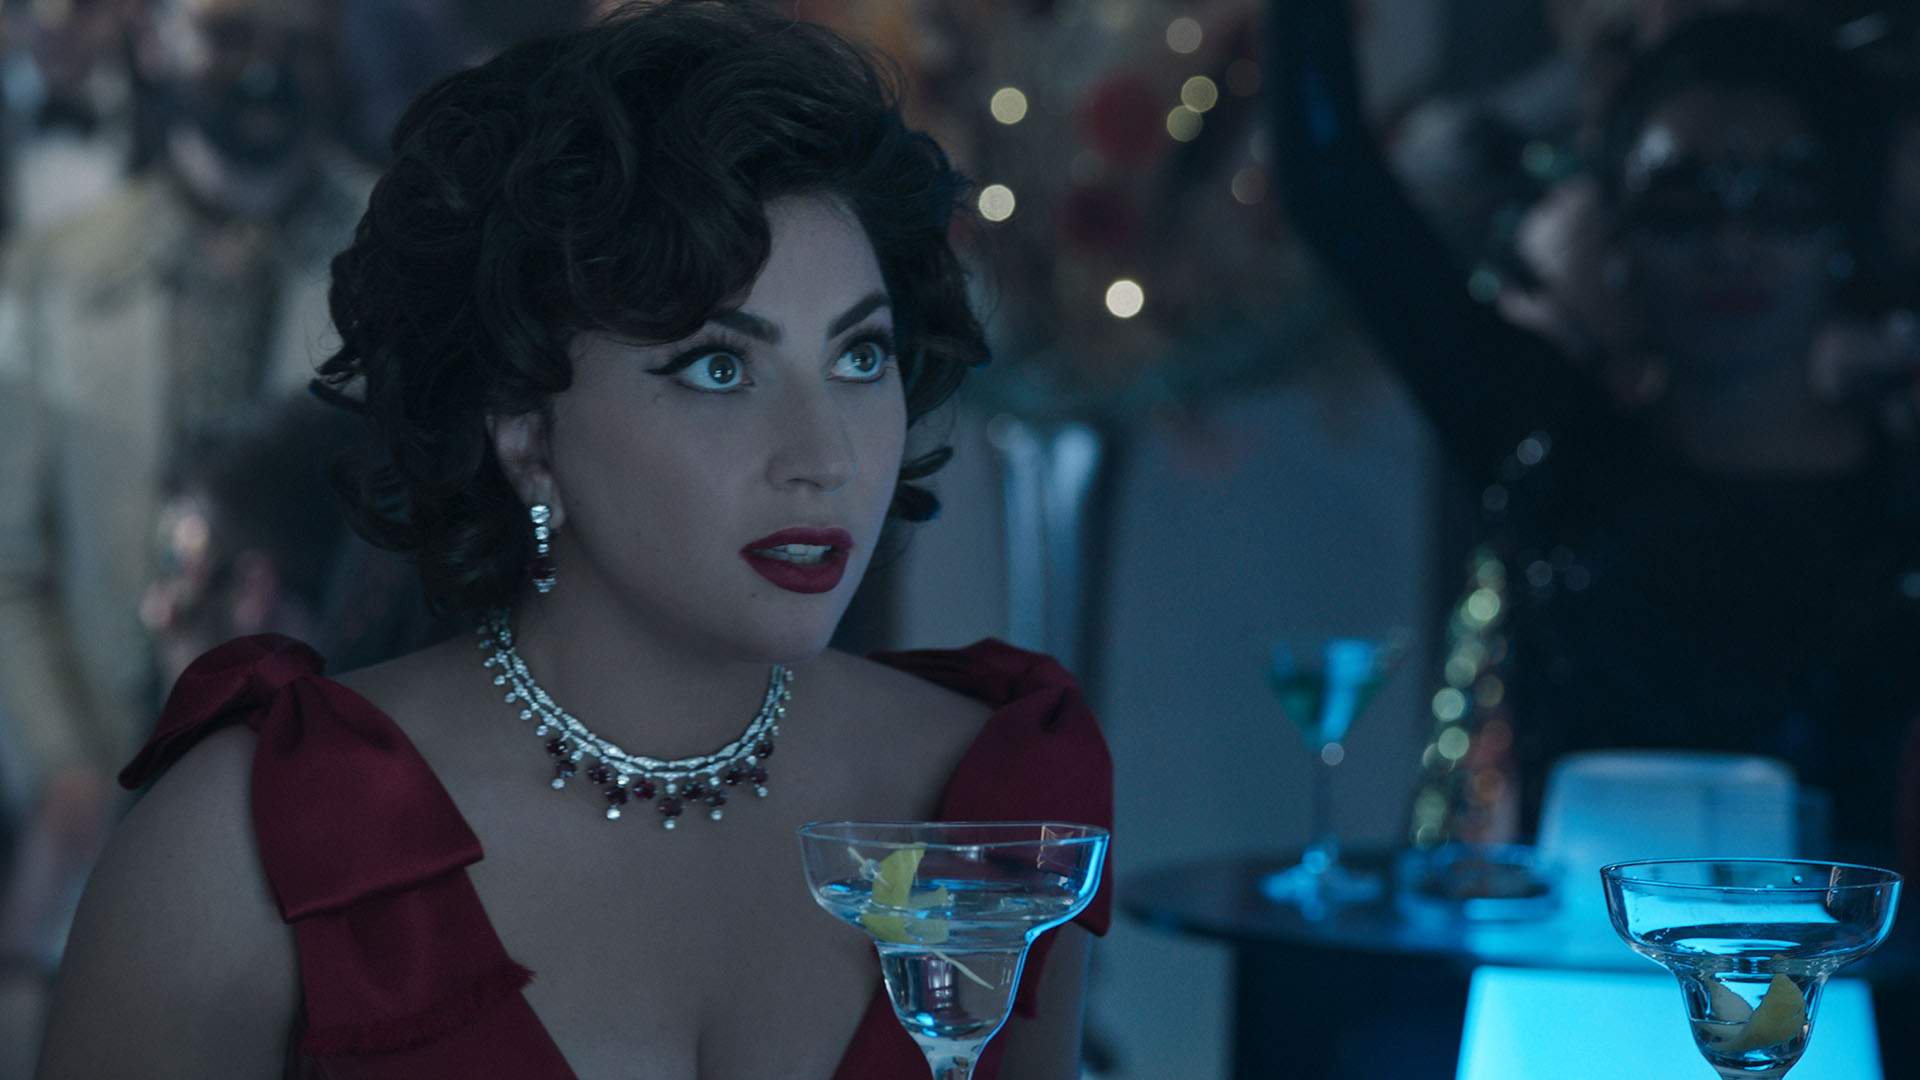 Lady Gaga Takes on a Fashion Dynasty in the New Trailer for True-Crime Drama 'House of Gucci' 